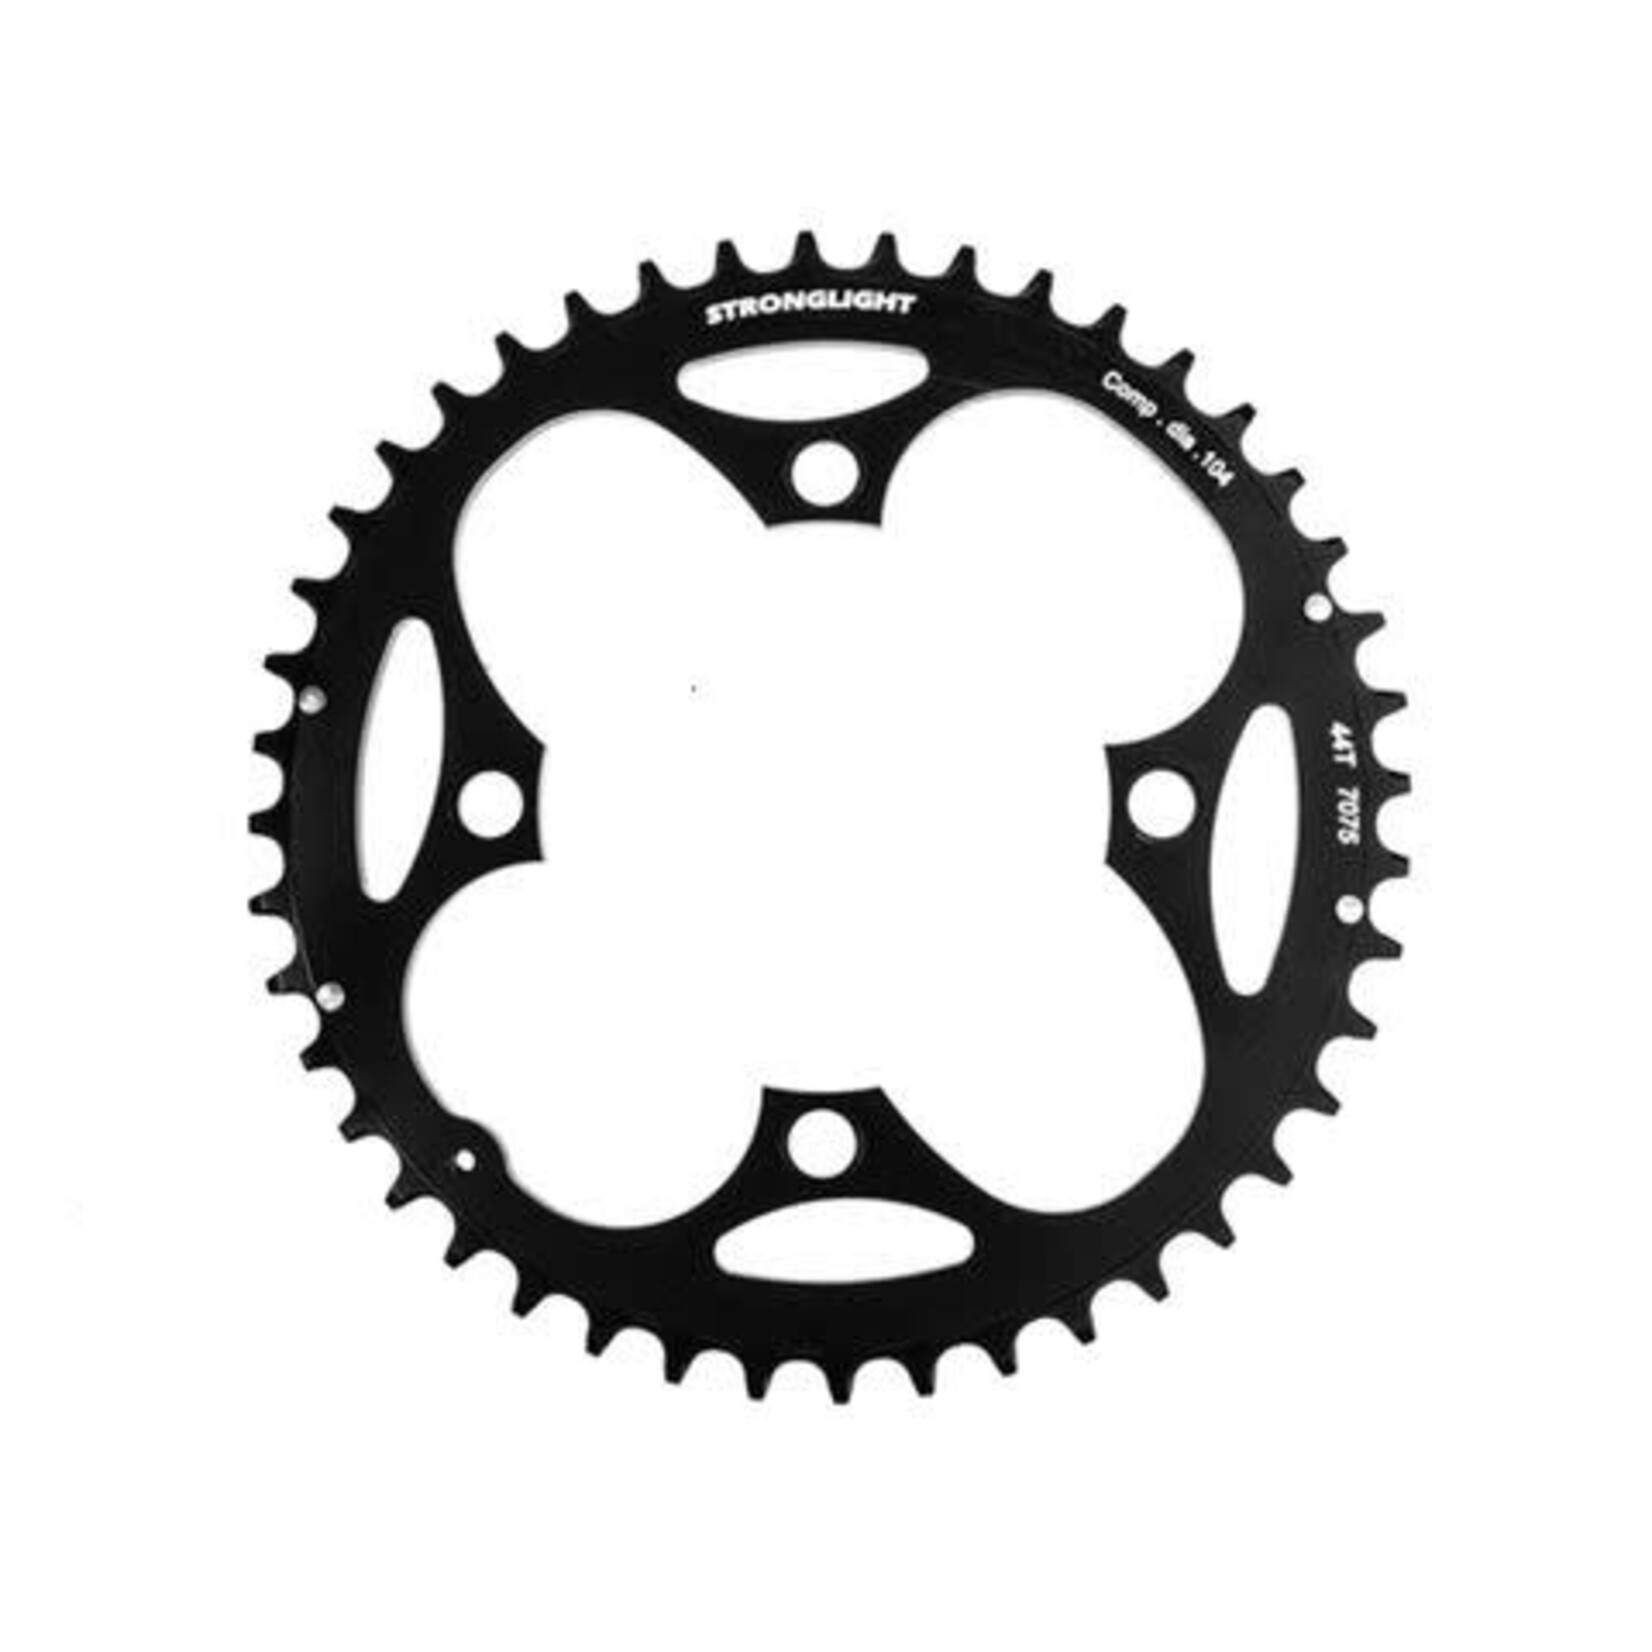 CHAINRING - MTB "STRONGLIGHT", 44T, 7075 CNC Black - 104mm BCD, 4 Hole for 9 Spd